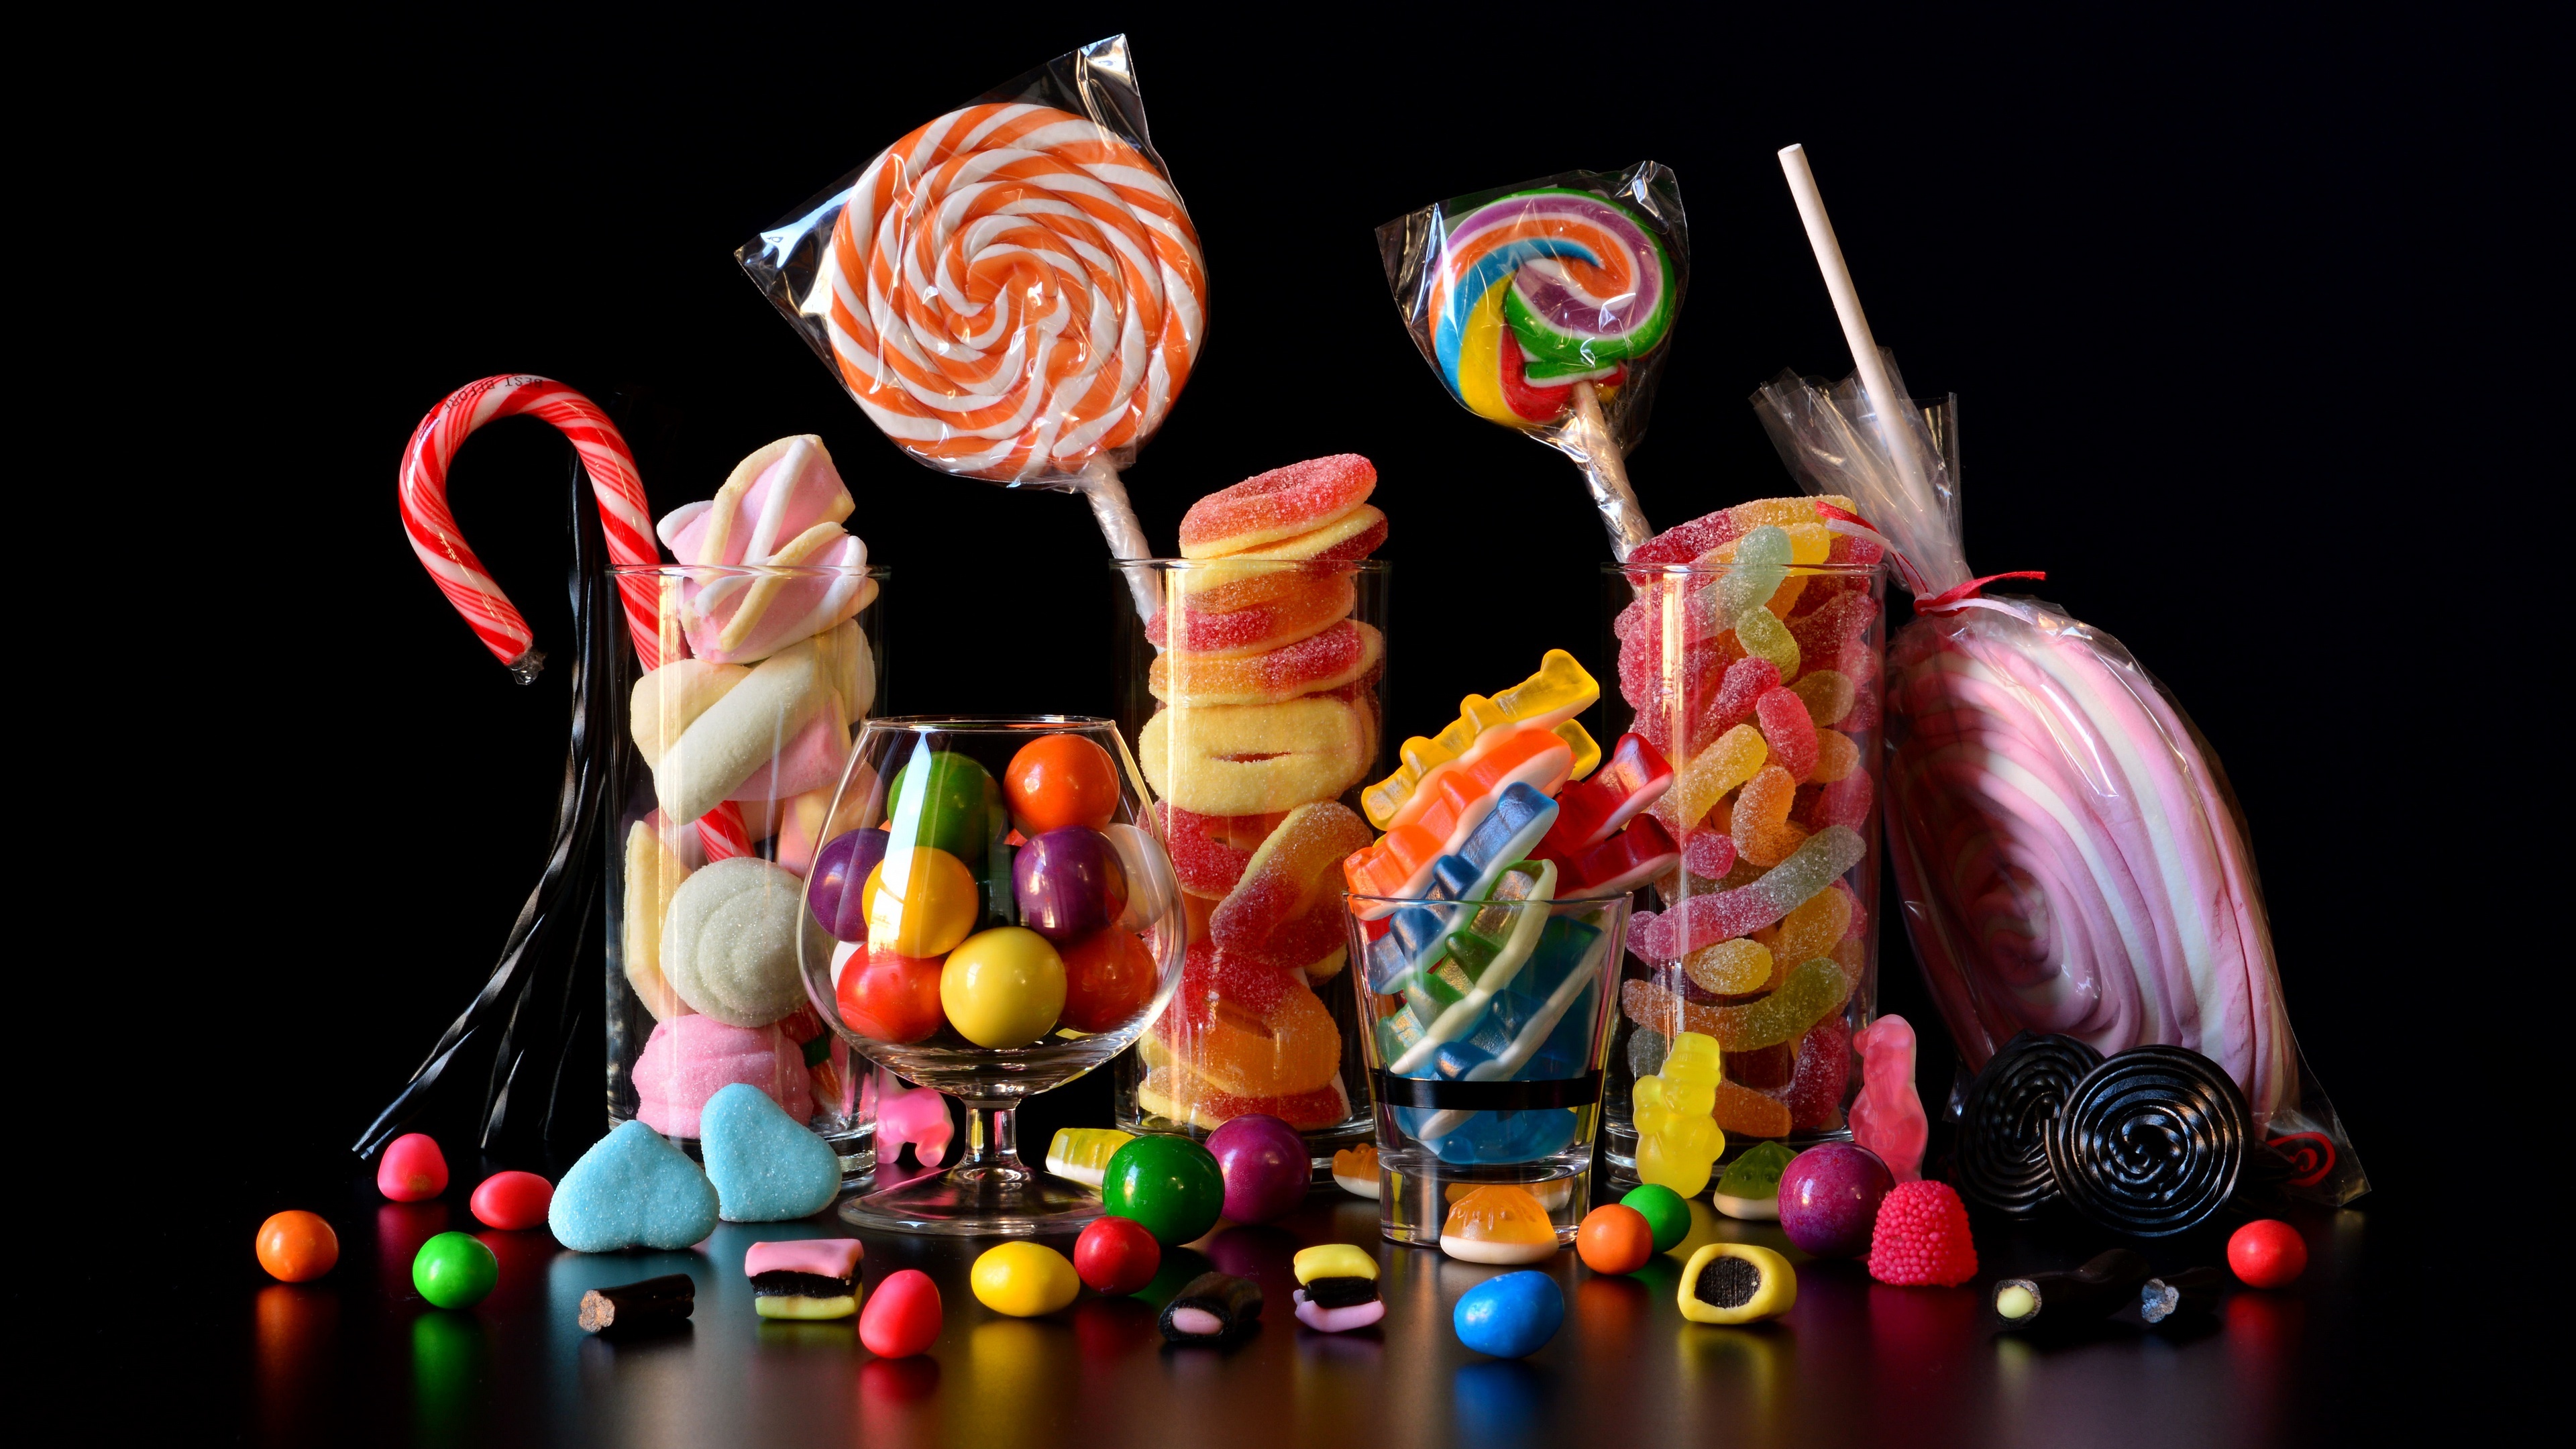 Sweets ultra HD wallpaper, Mouthwatering confectionery, Delicious candy assortment, Tempting treat, 3840x2160 4K Desktop